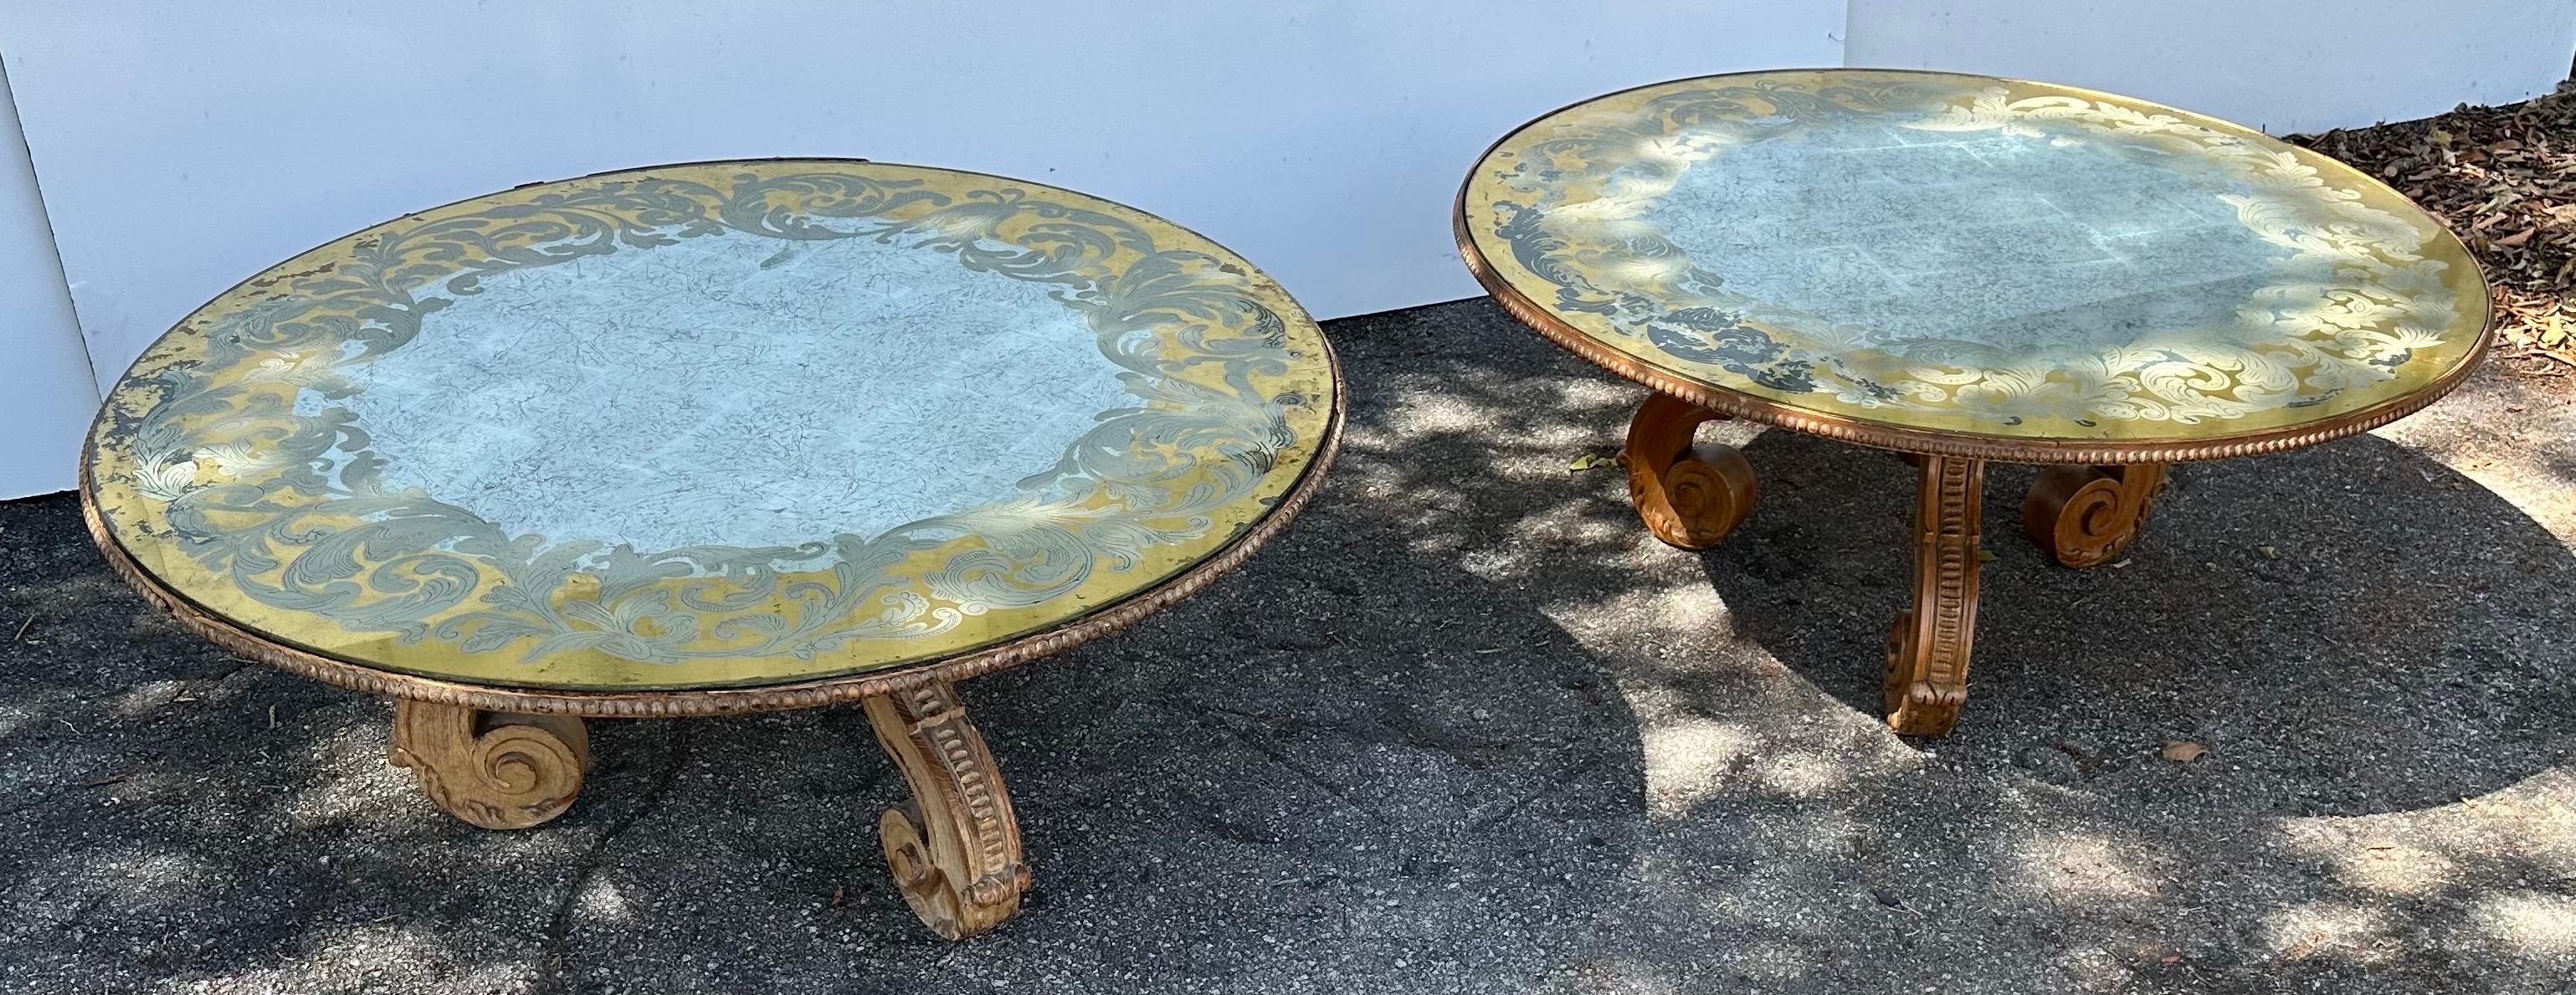 Pair of Baker Furniture eglomise mirror and bleached oak Tables.
Nice distressed look .
Labeled Baker.